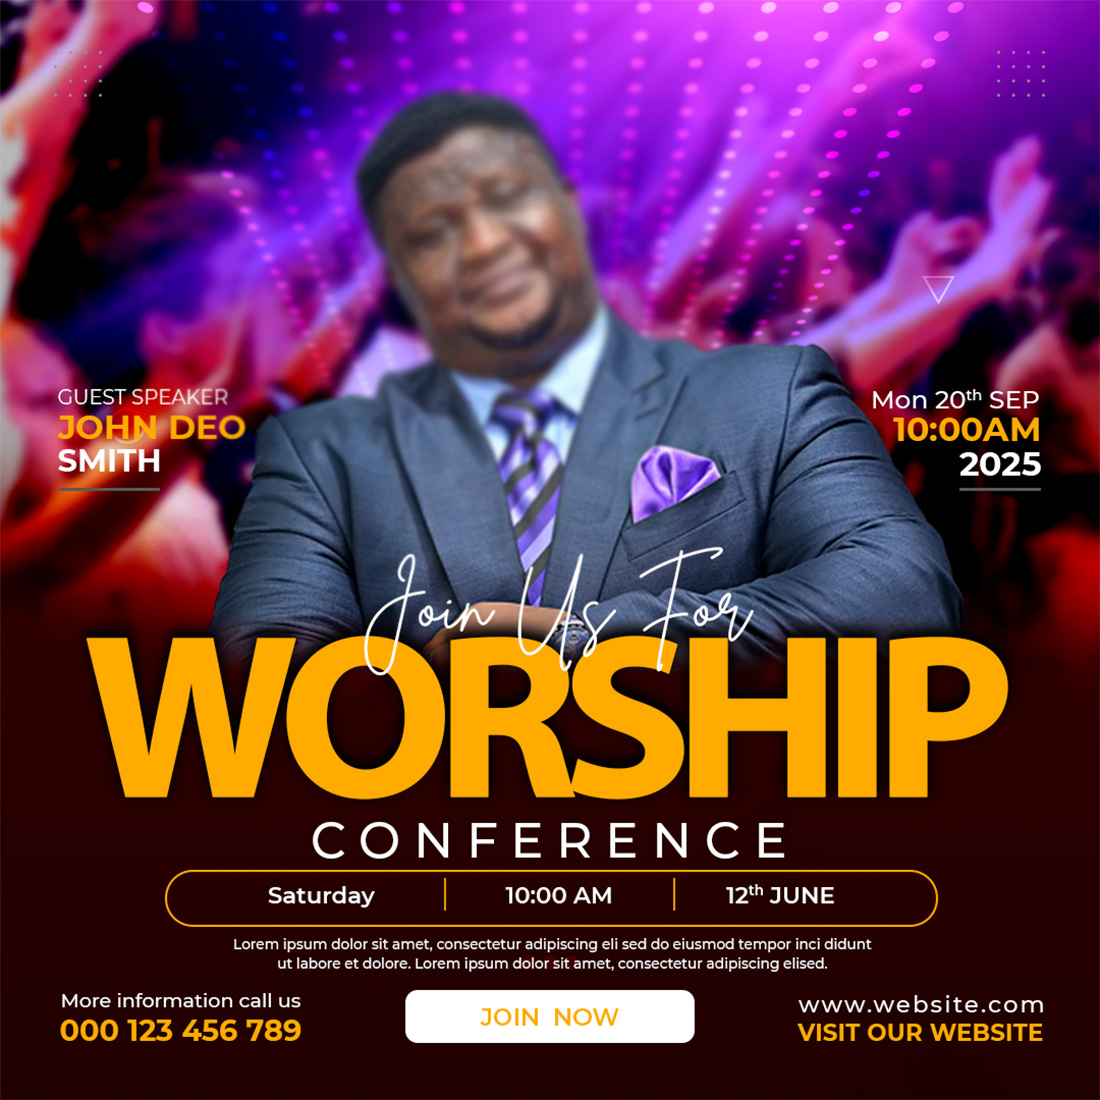 Beautiful Worship Flyers Templates cover image.